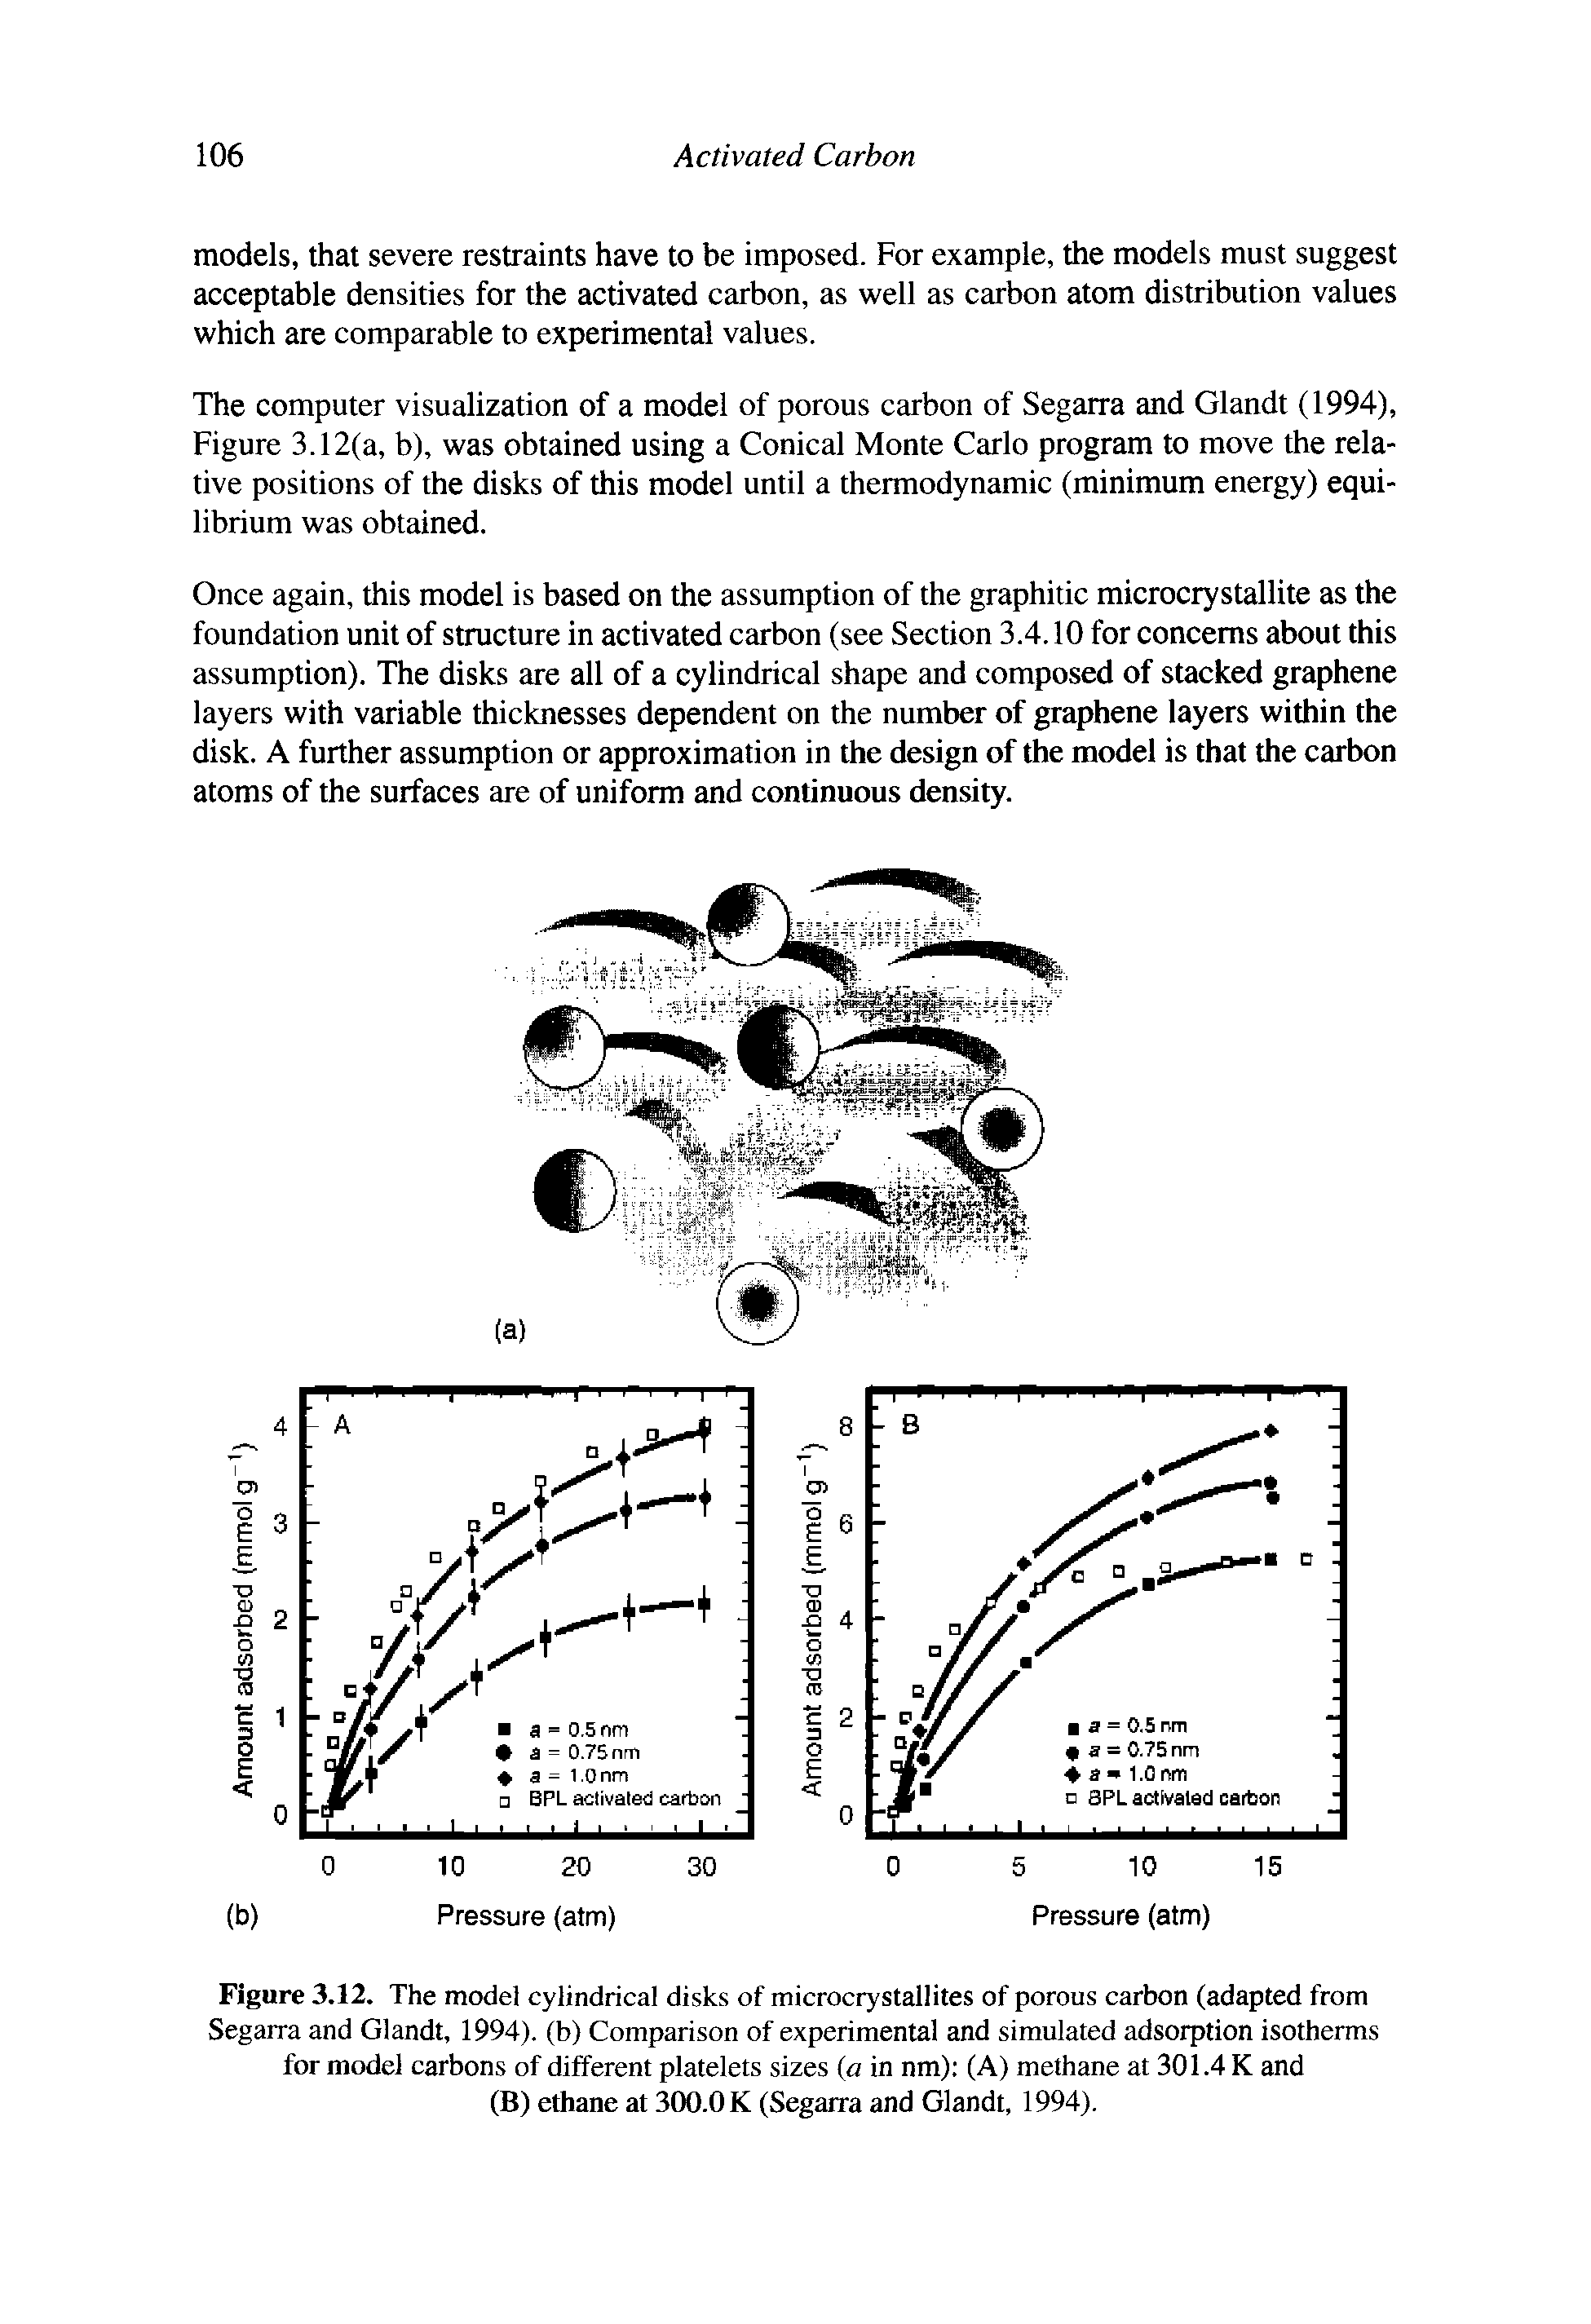 Figure 3.12. The model cylindrical disks of microcrystallites of porous carbon (adapted from Segarra and Glandt, 1994). (b) Comparison of experimental and simulated adsorption isotherms for model carbons of different platelets sizes (a in nm) (A) methane at 301.4 K and (B) ethane at 300.0 K (Segarra and Glandt, 1994).